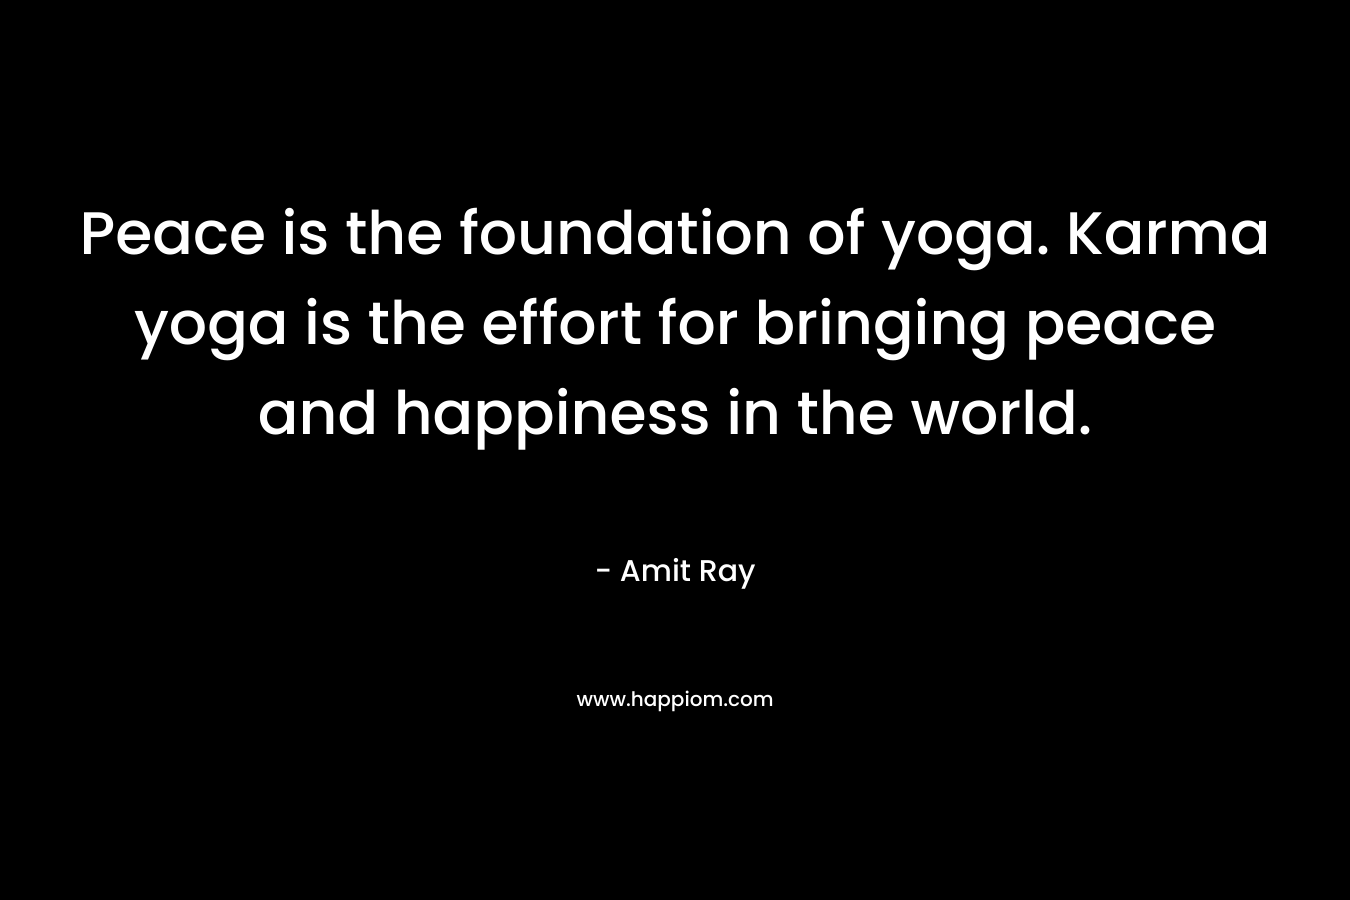 Peace is the foundation of yoga. Karma yoga is the effort for bringing peace and happiness in the world.